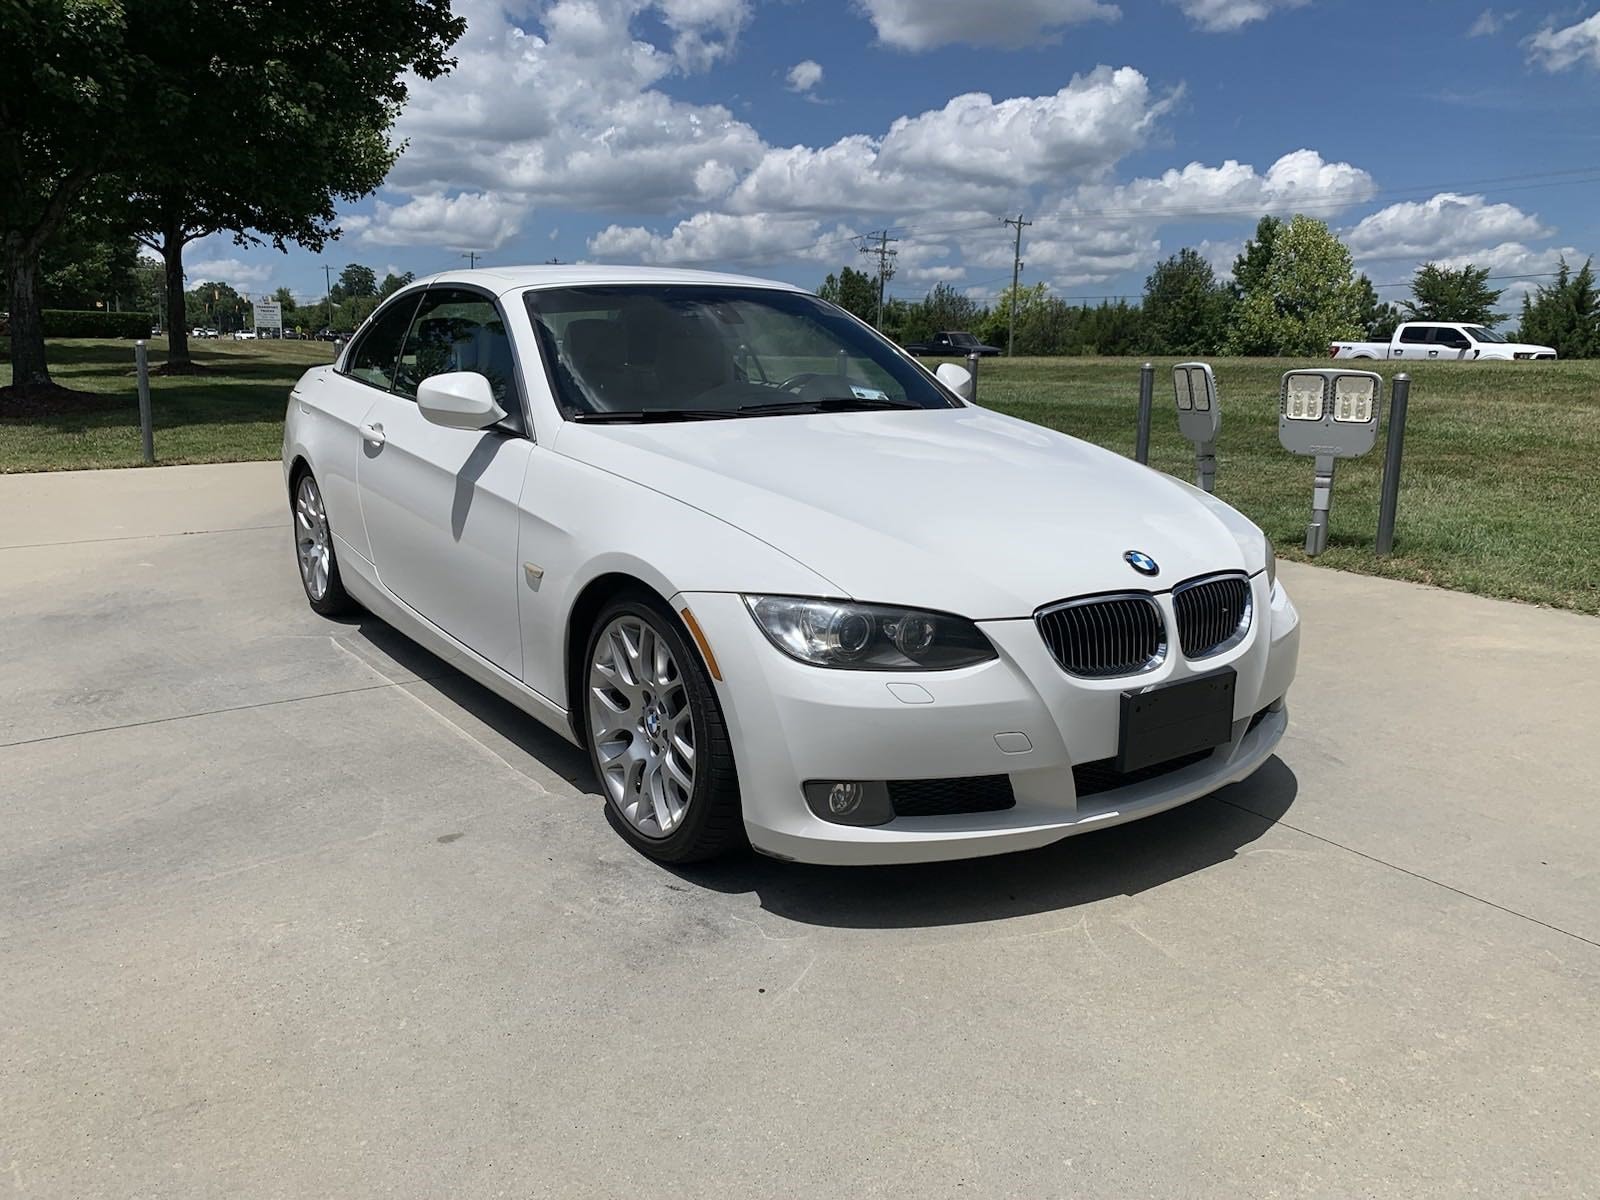 Used 2010 BMW 3 Series 328i with VIN WBAWR3C55AP462410 for sale in Charlotte, NC